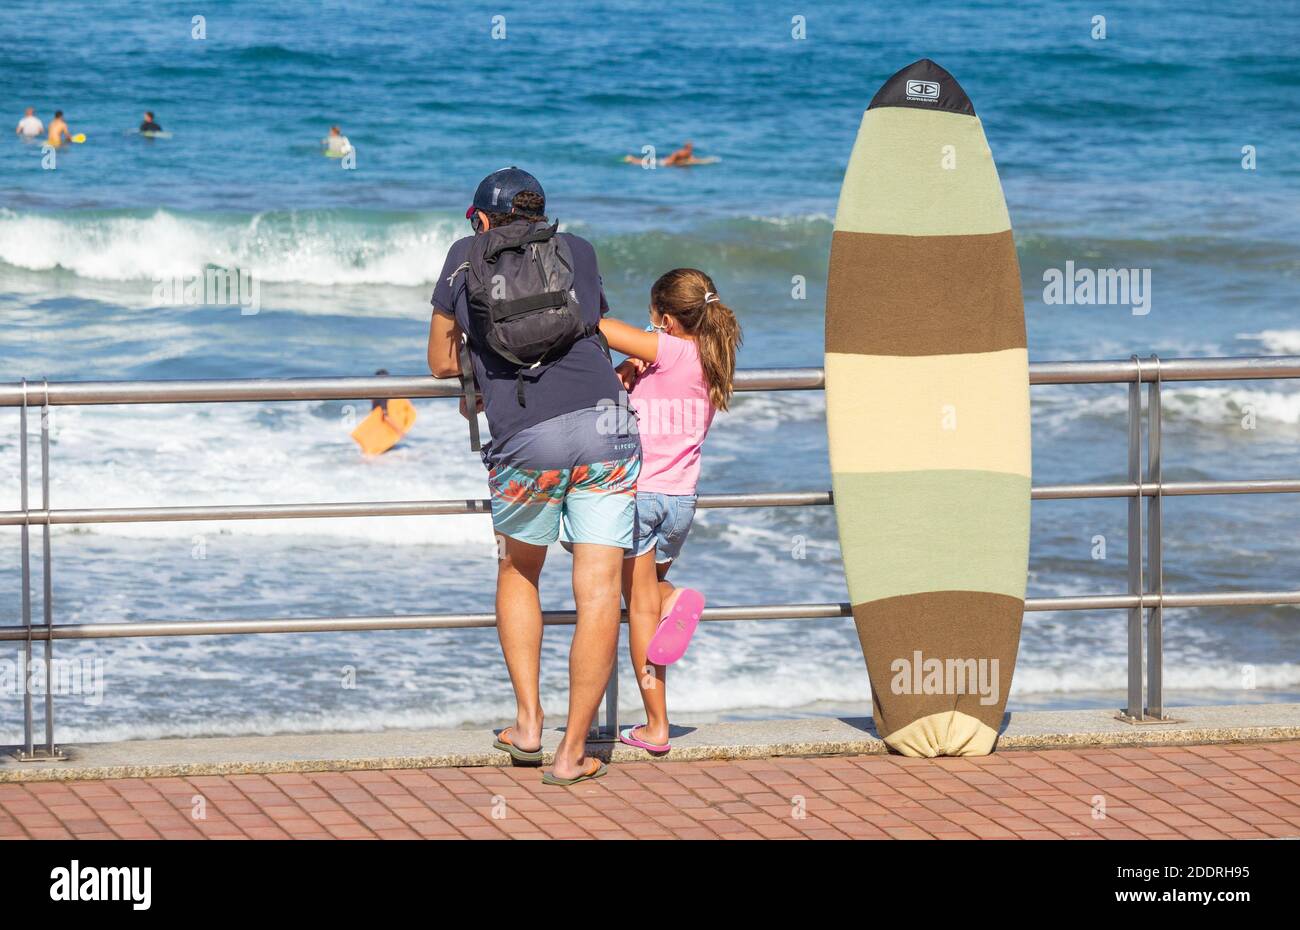 Adult and young girl standing next to surfboard looking out to sea. Stock Photo